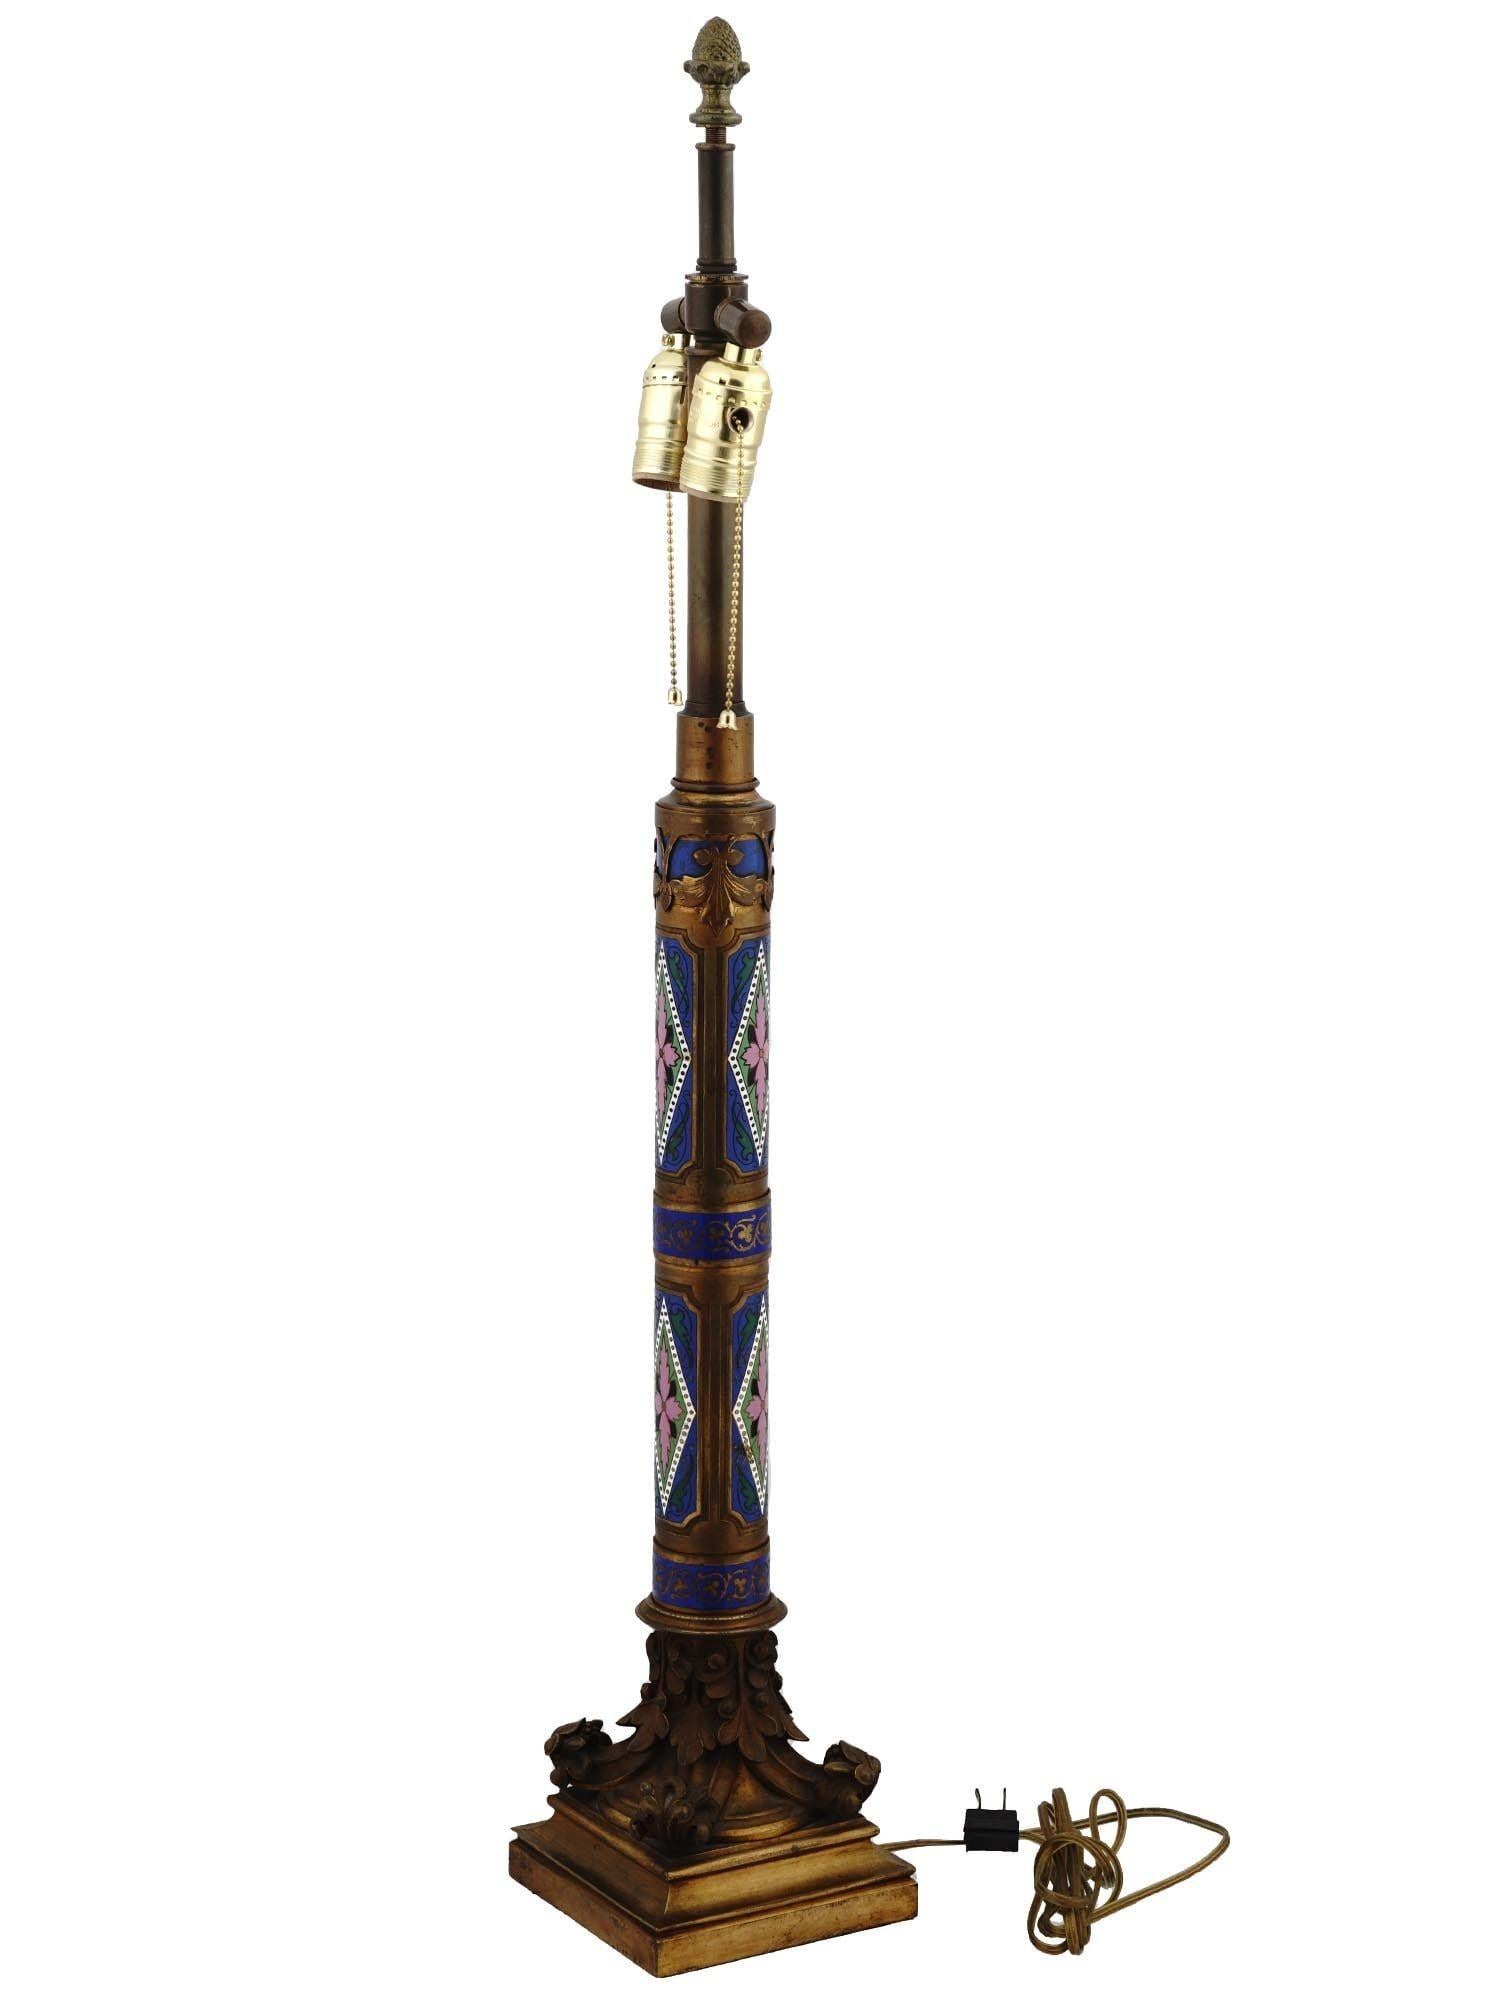 20th Century Antique Champleve Enameled Bronze Table Lamp Attributed to Caldwell  For Sale